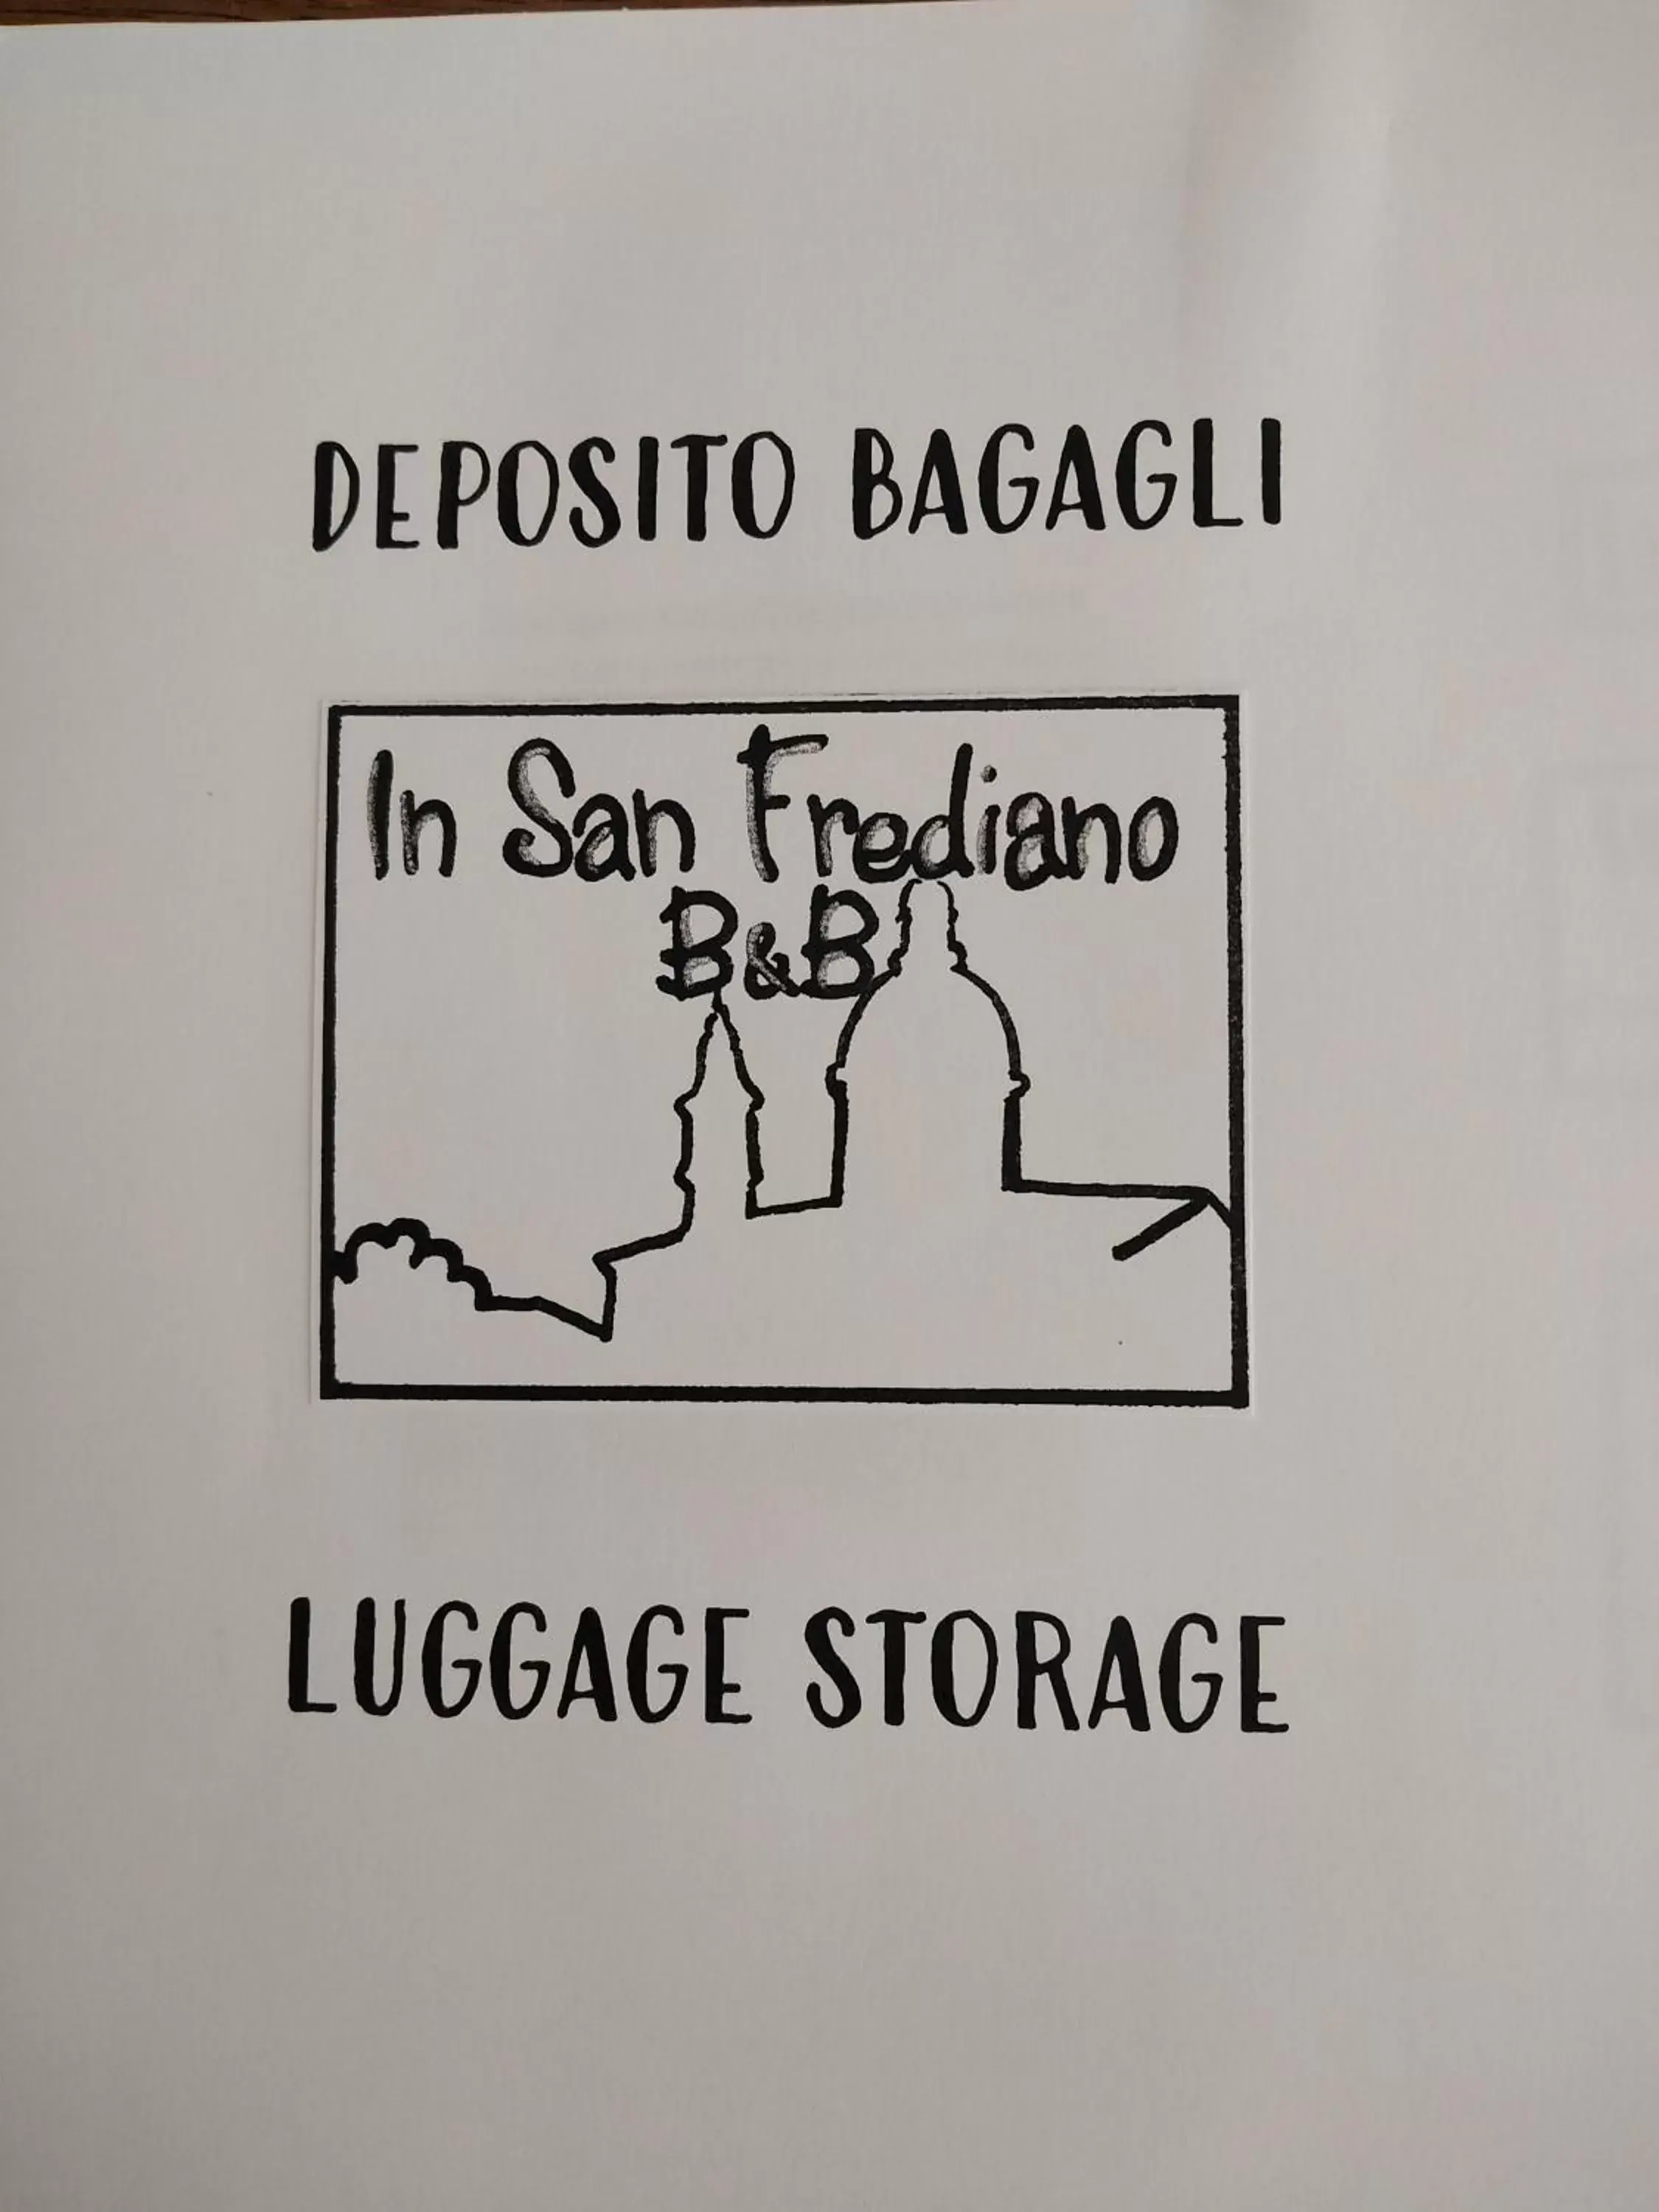 Property logo or sign in In San Frediano B&B